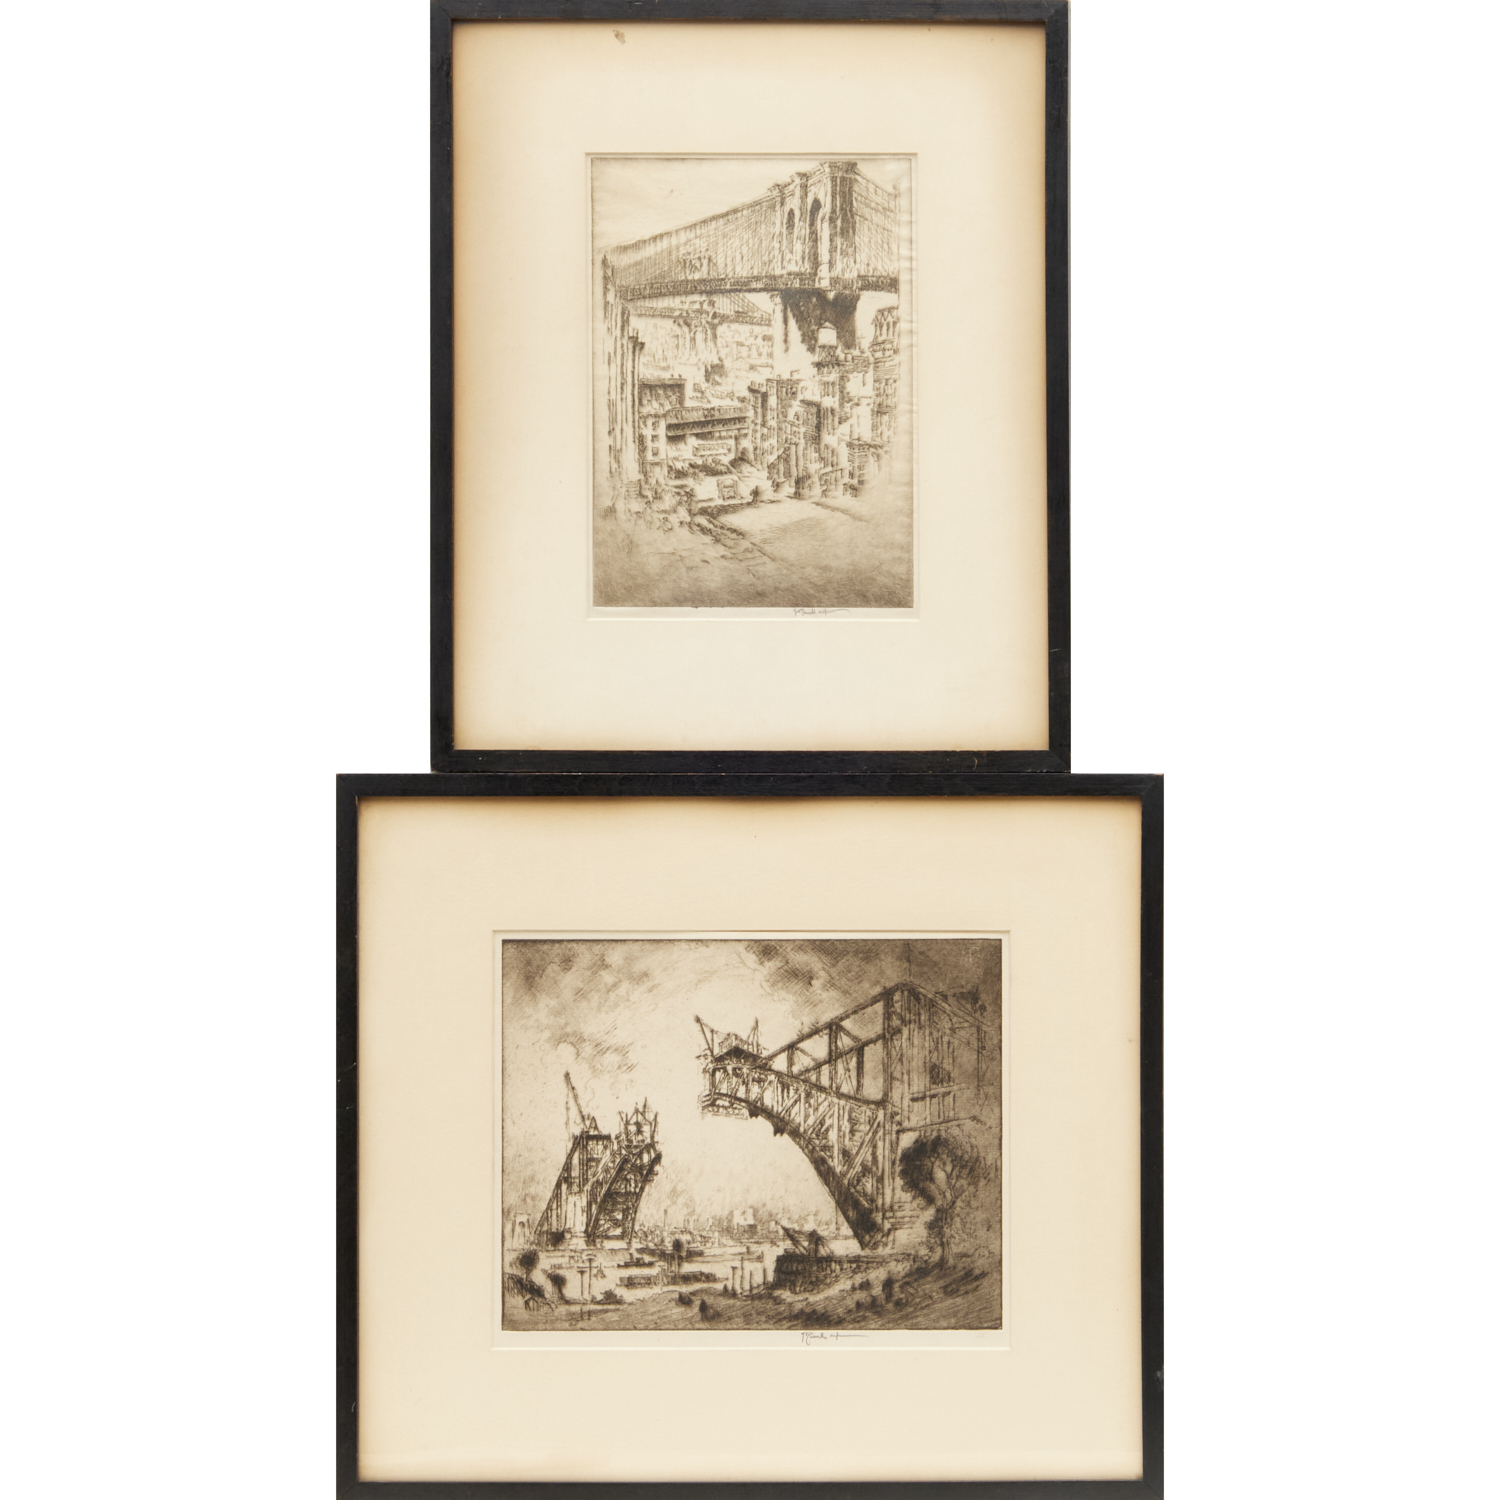 JOSEPH PENNELL 2 SIGNED ETCHINGS 2fb475